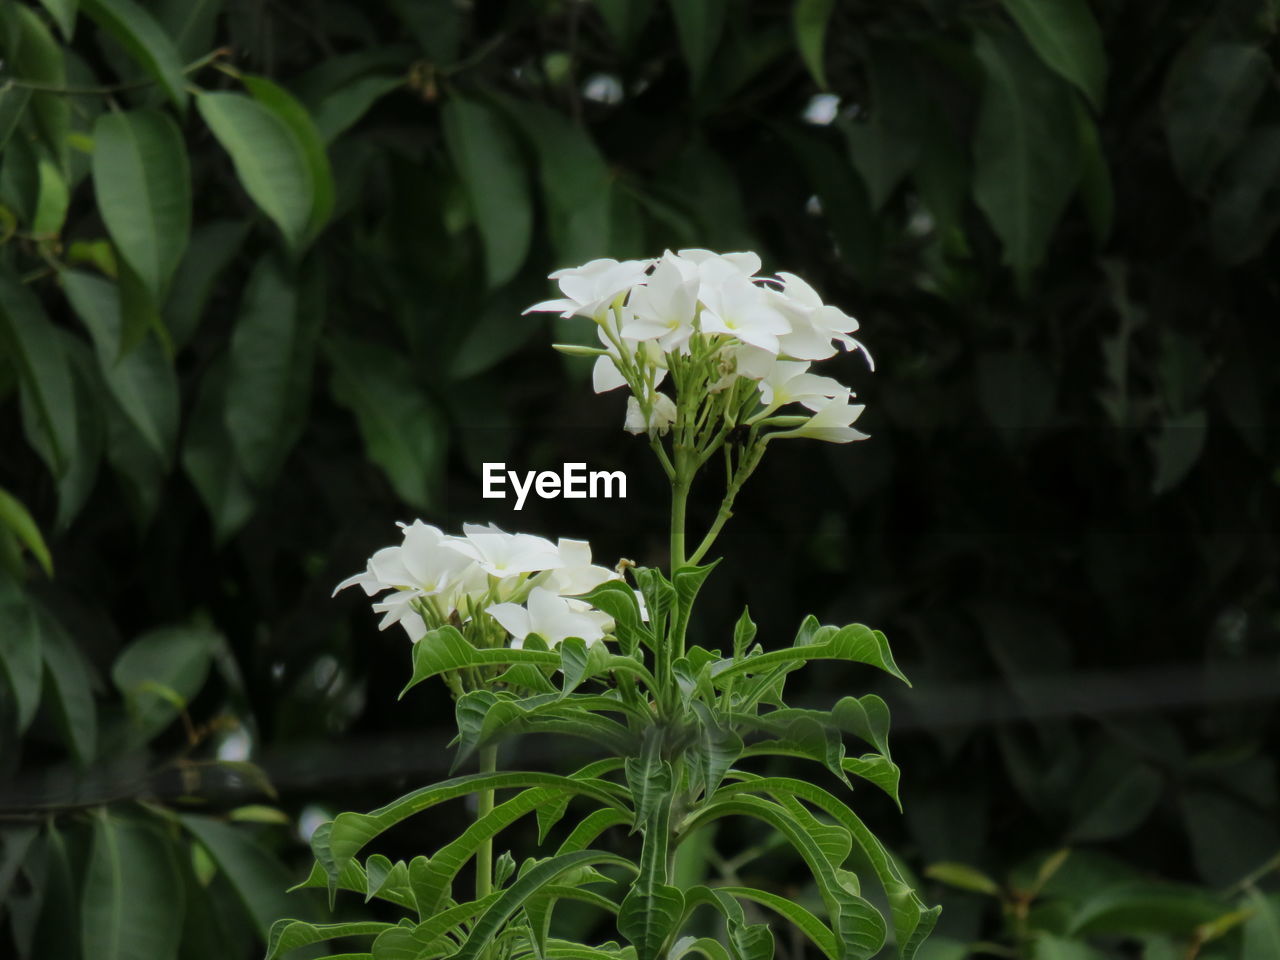 CLOSE-UP OF WHITE FLOWERING PLANT AGAINST GREEN LEAVES